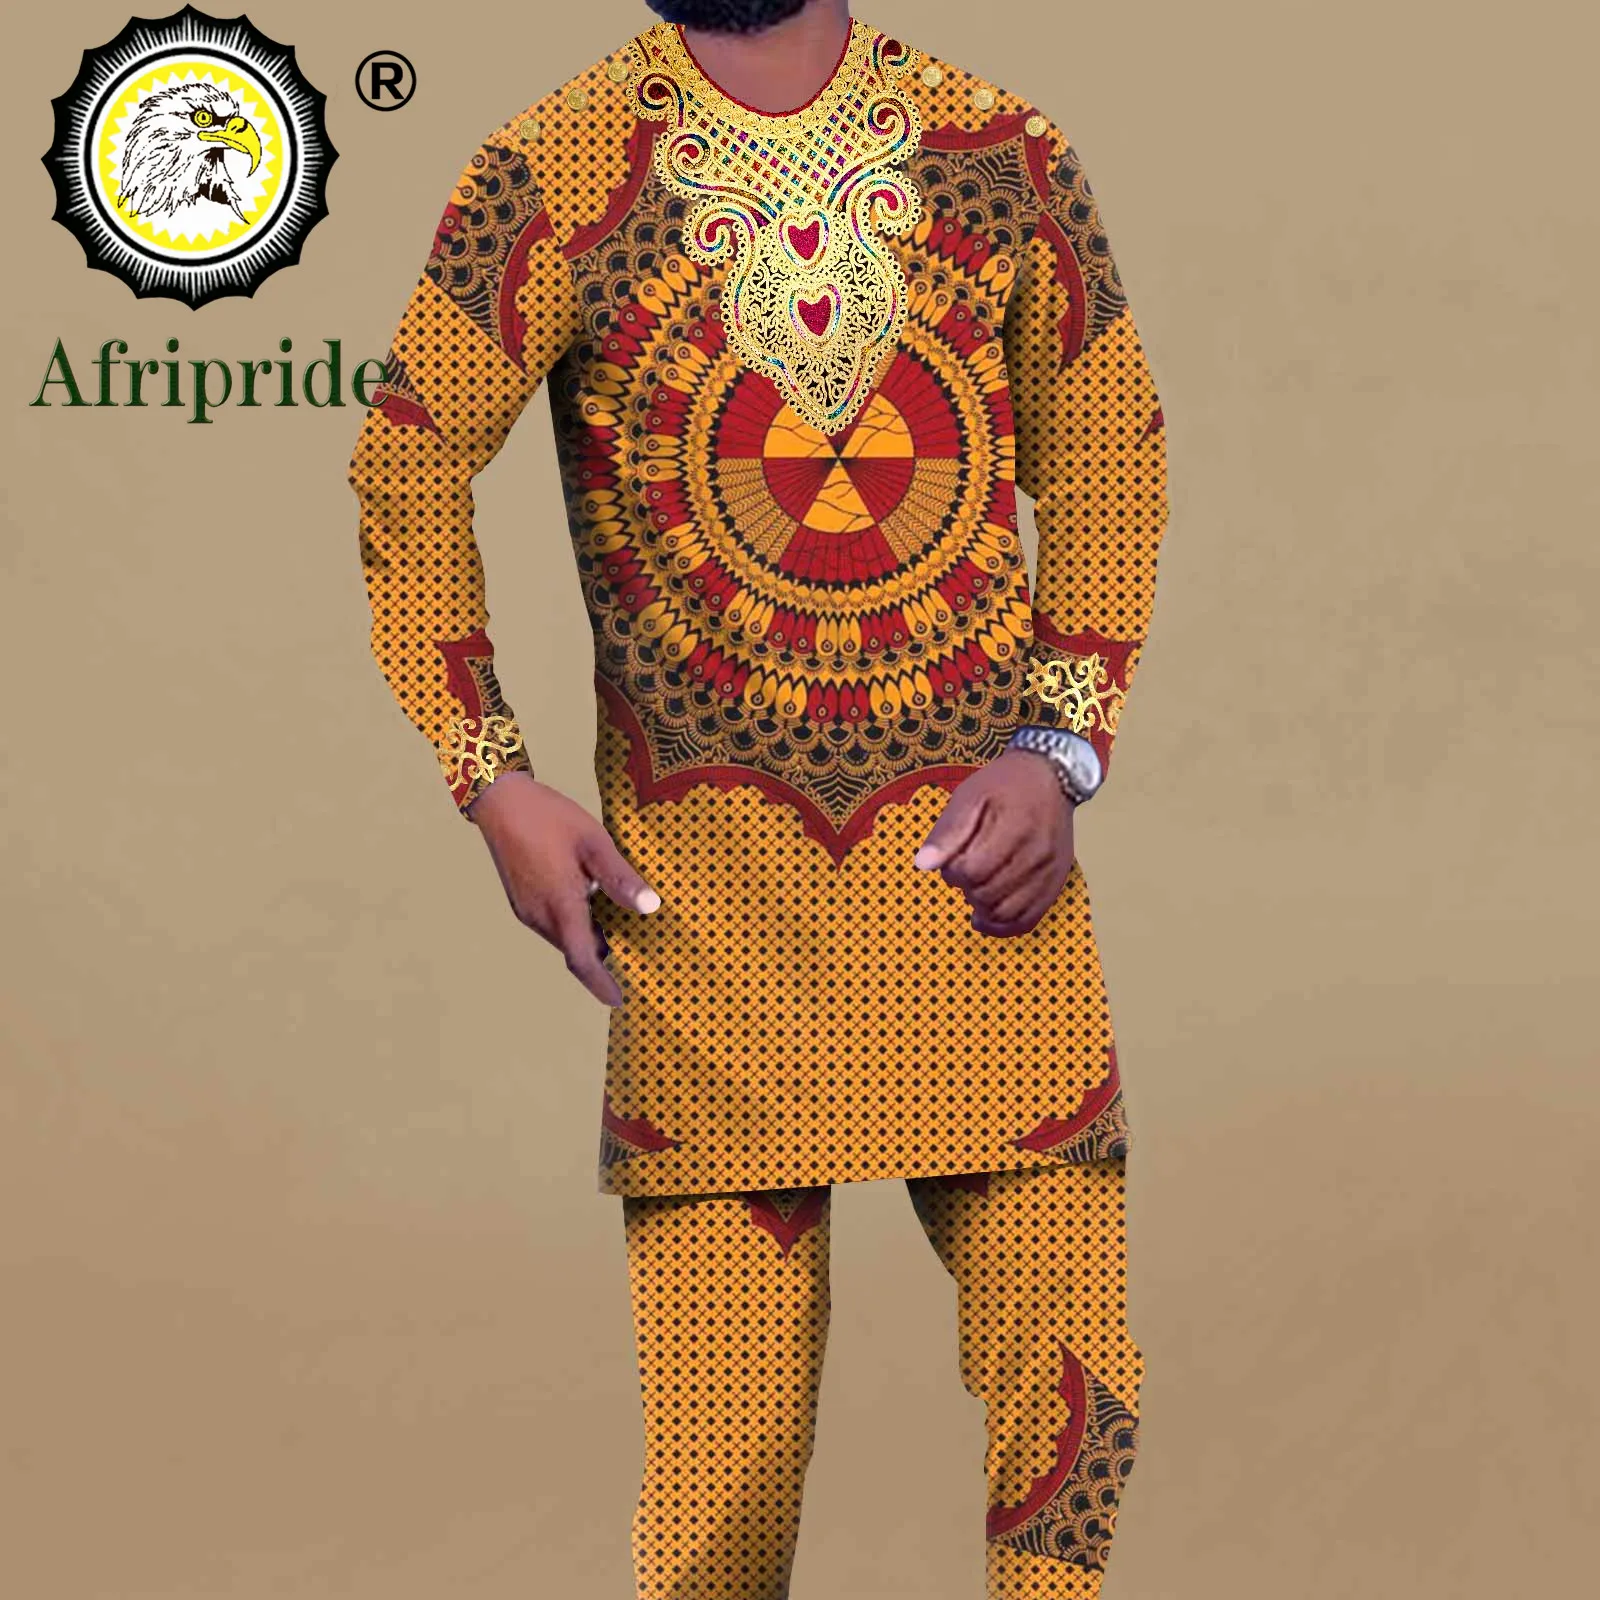 African Men Clothing Embroidery Print Shirts and Pants 2 Piece Set Dashiki Outfits Tribal Attire Kaftan Wedding Suit A2216022